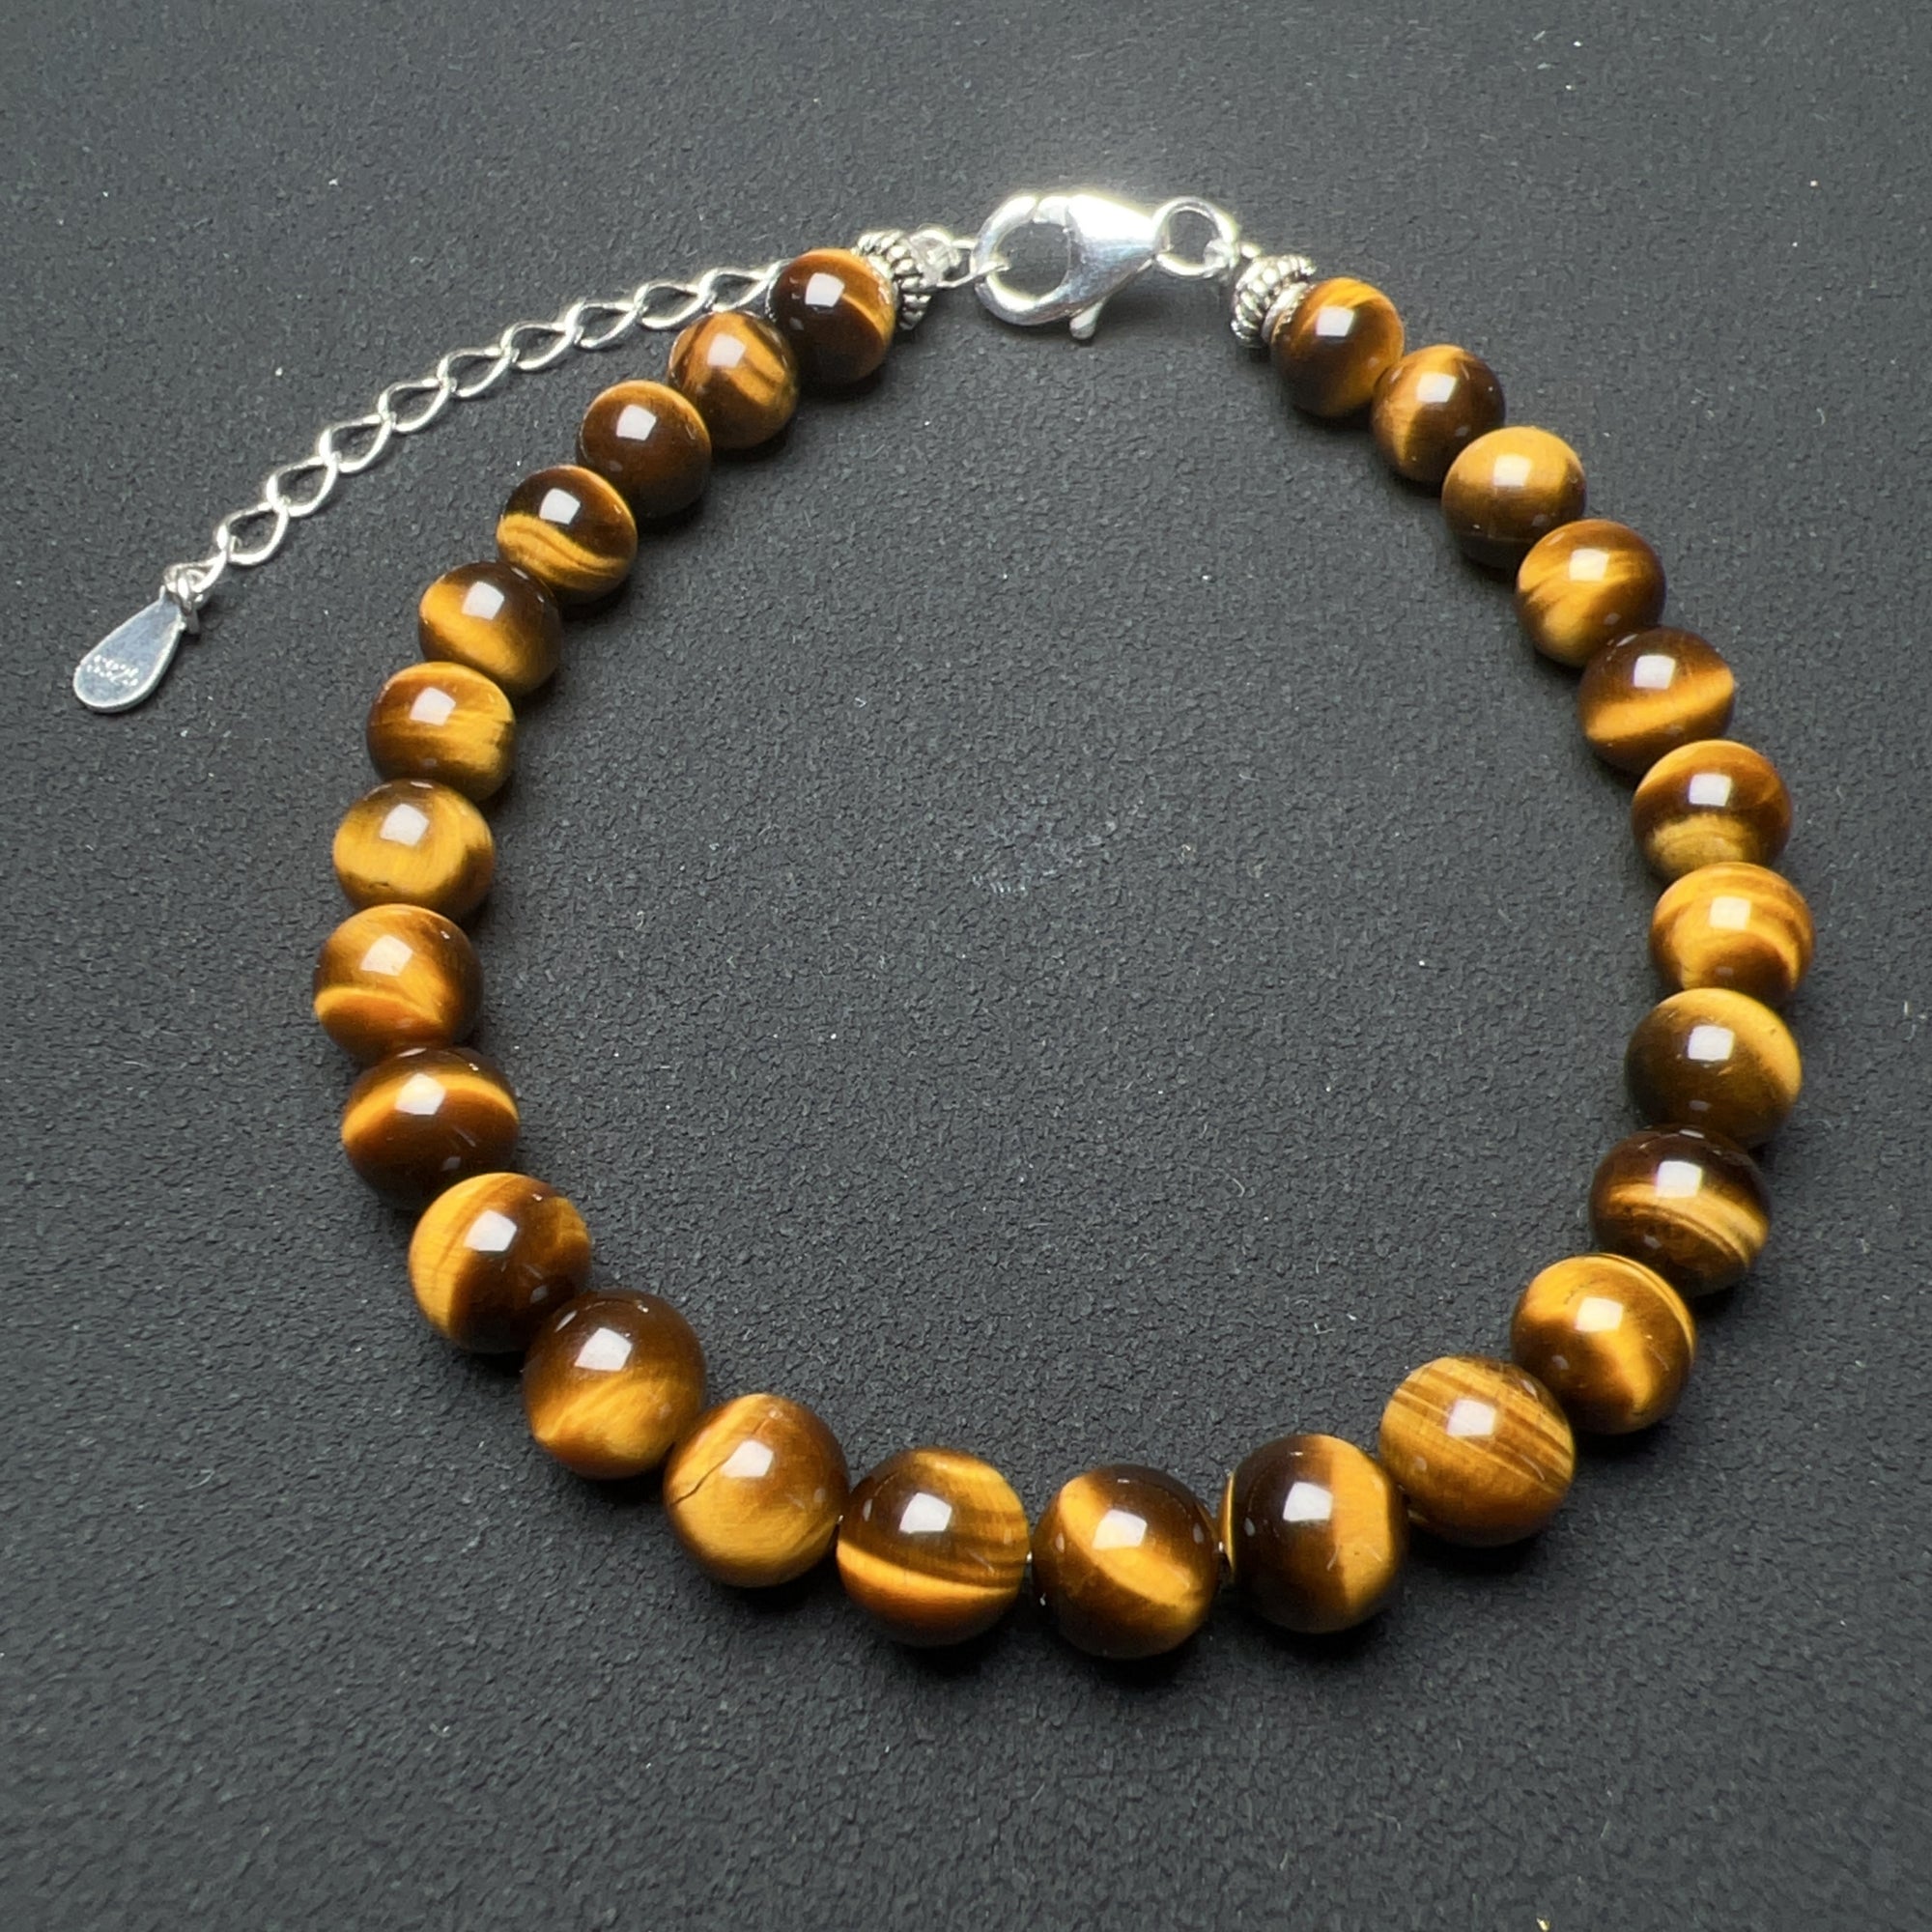 Enhance your style and promote positive energy with our 6mm Top-grade Brown Tiger Eye Healing Crystal Gemstones Bracelet. 